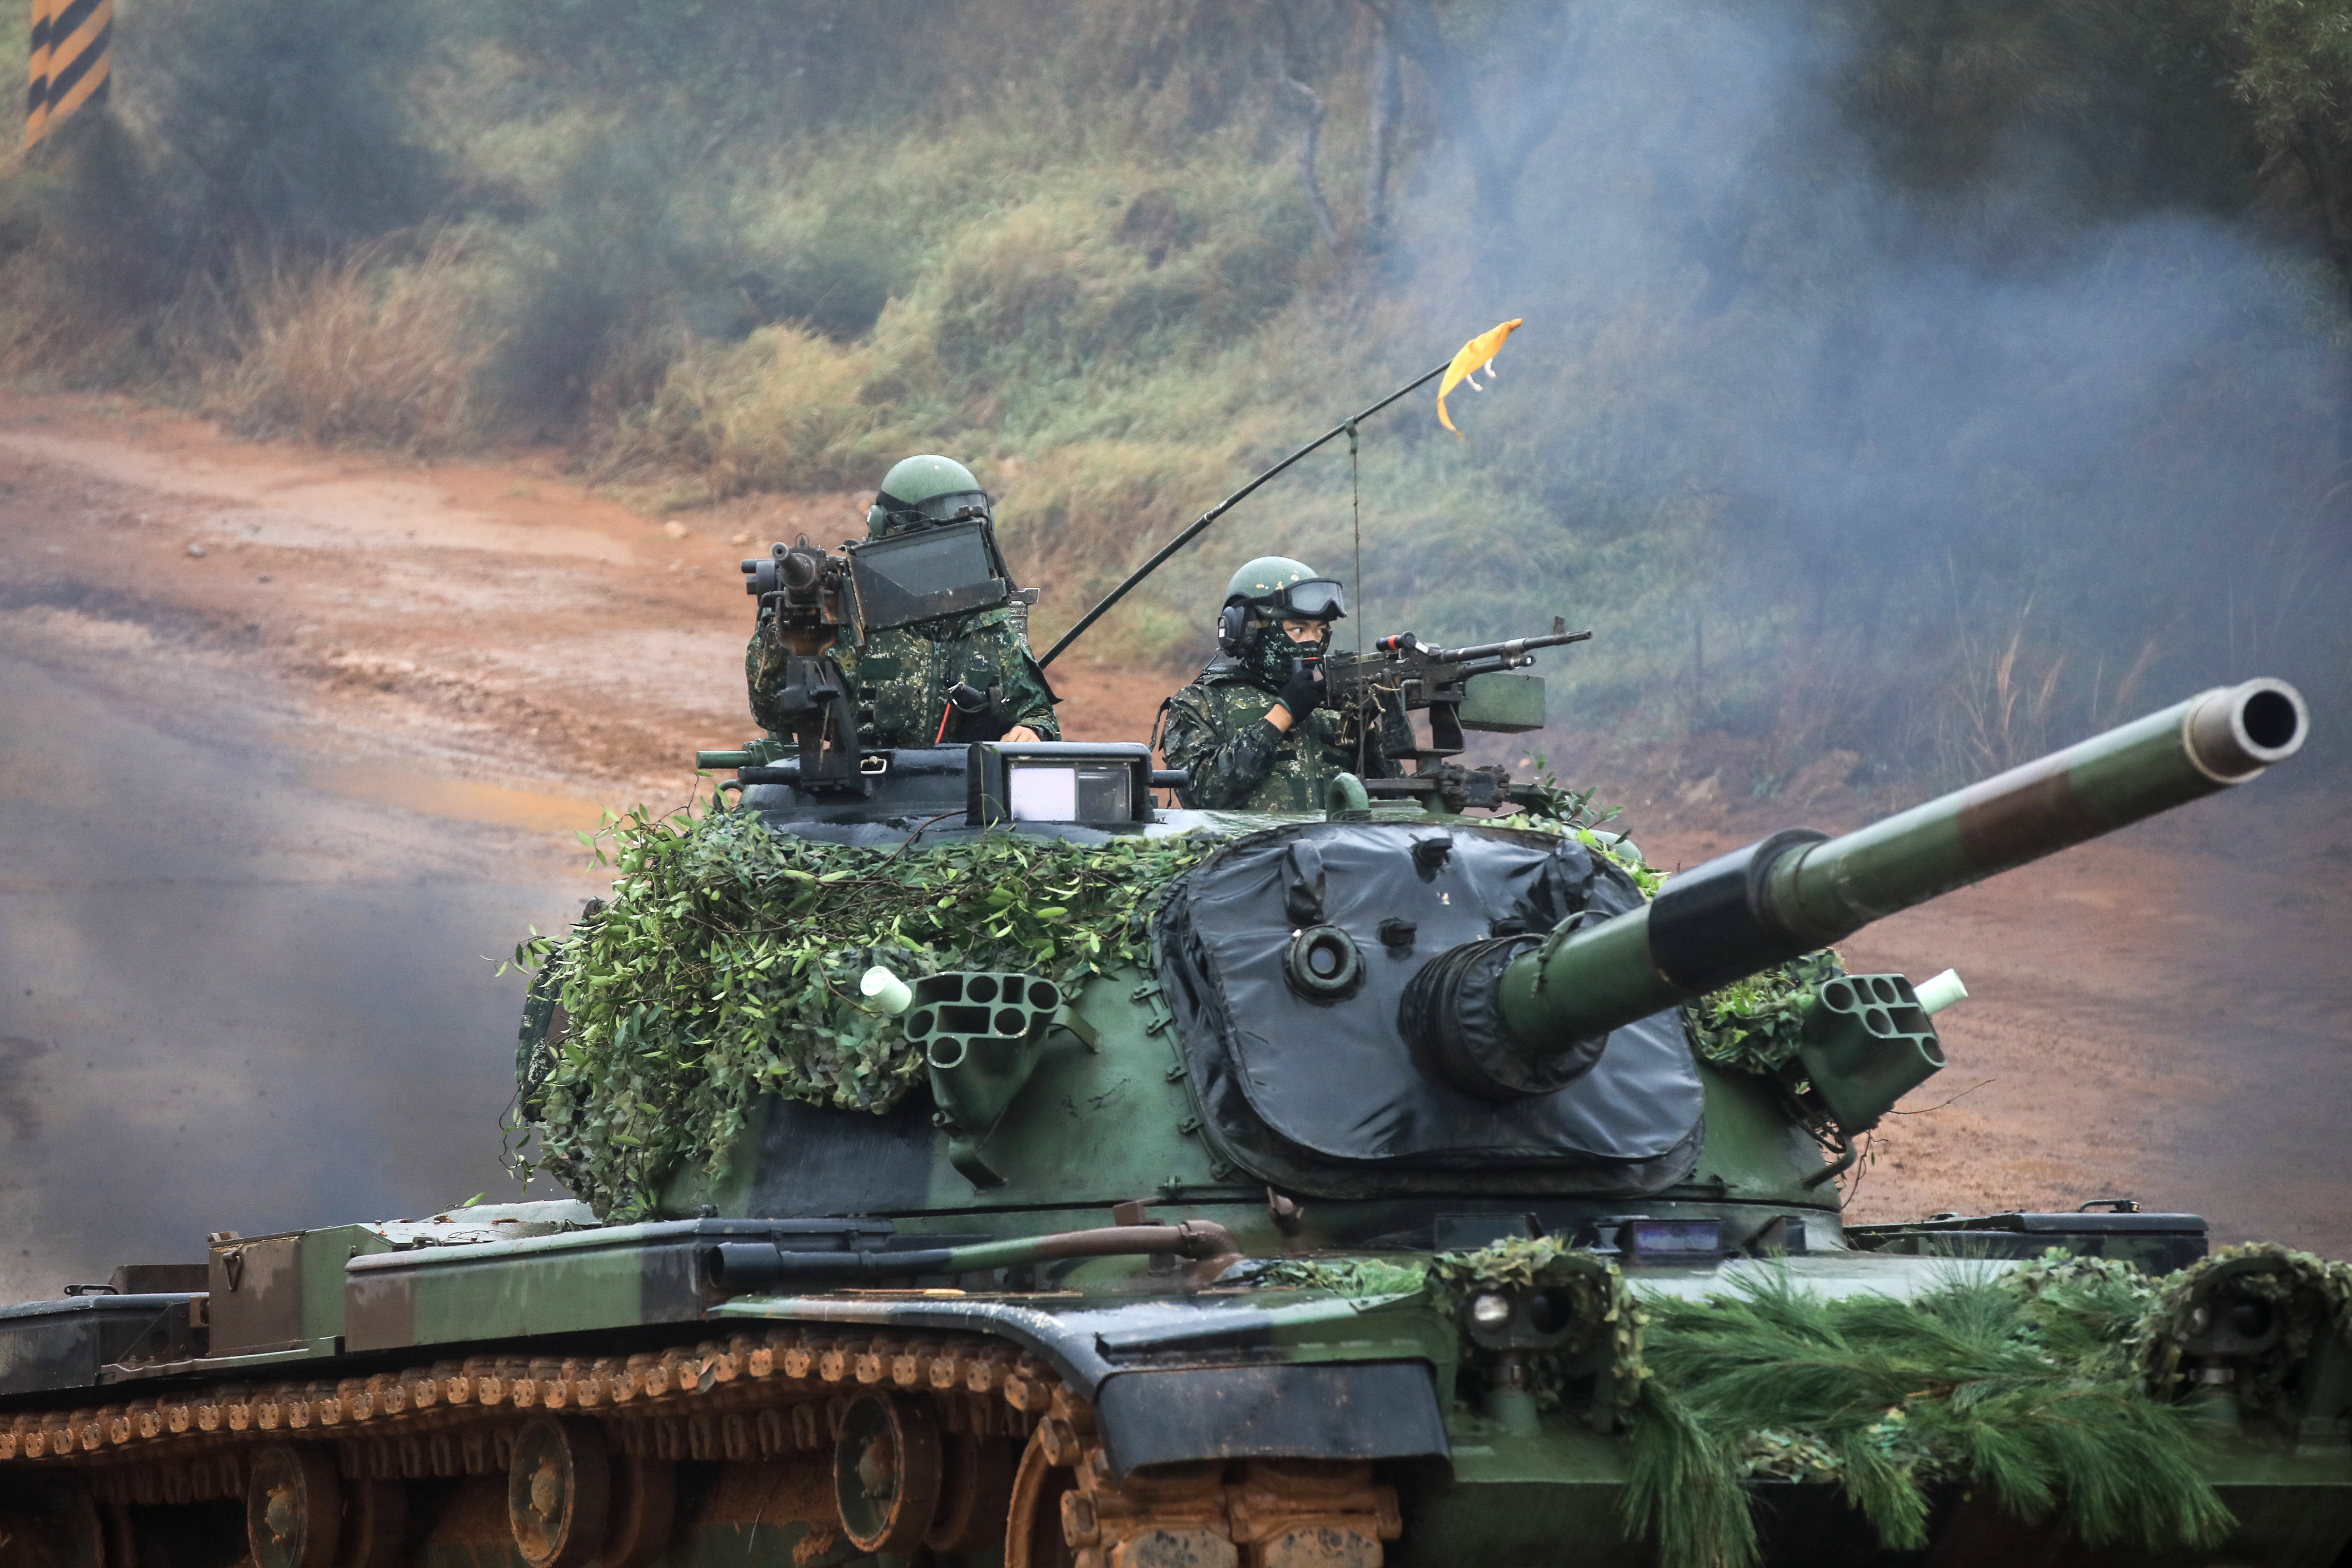 Taiwan Armed Forces soldiers crew a CM-11 Brave Tiger battle tank during a military combat live-fire exercise in Hsinchu, Taiwan, on December 21. Taiwan has always been viewed as unfinished business and an issue of great importance for Beijing. Photo: Bloomberg